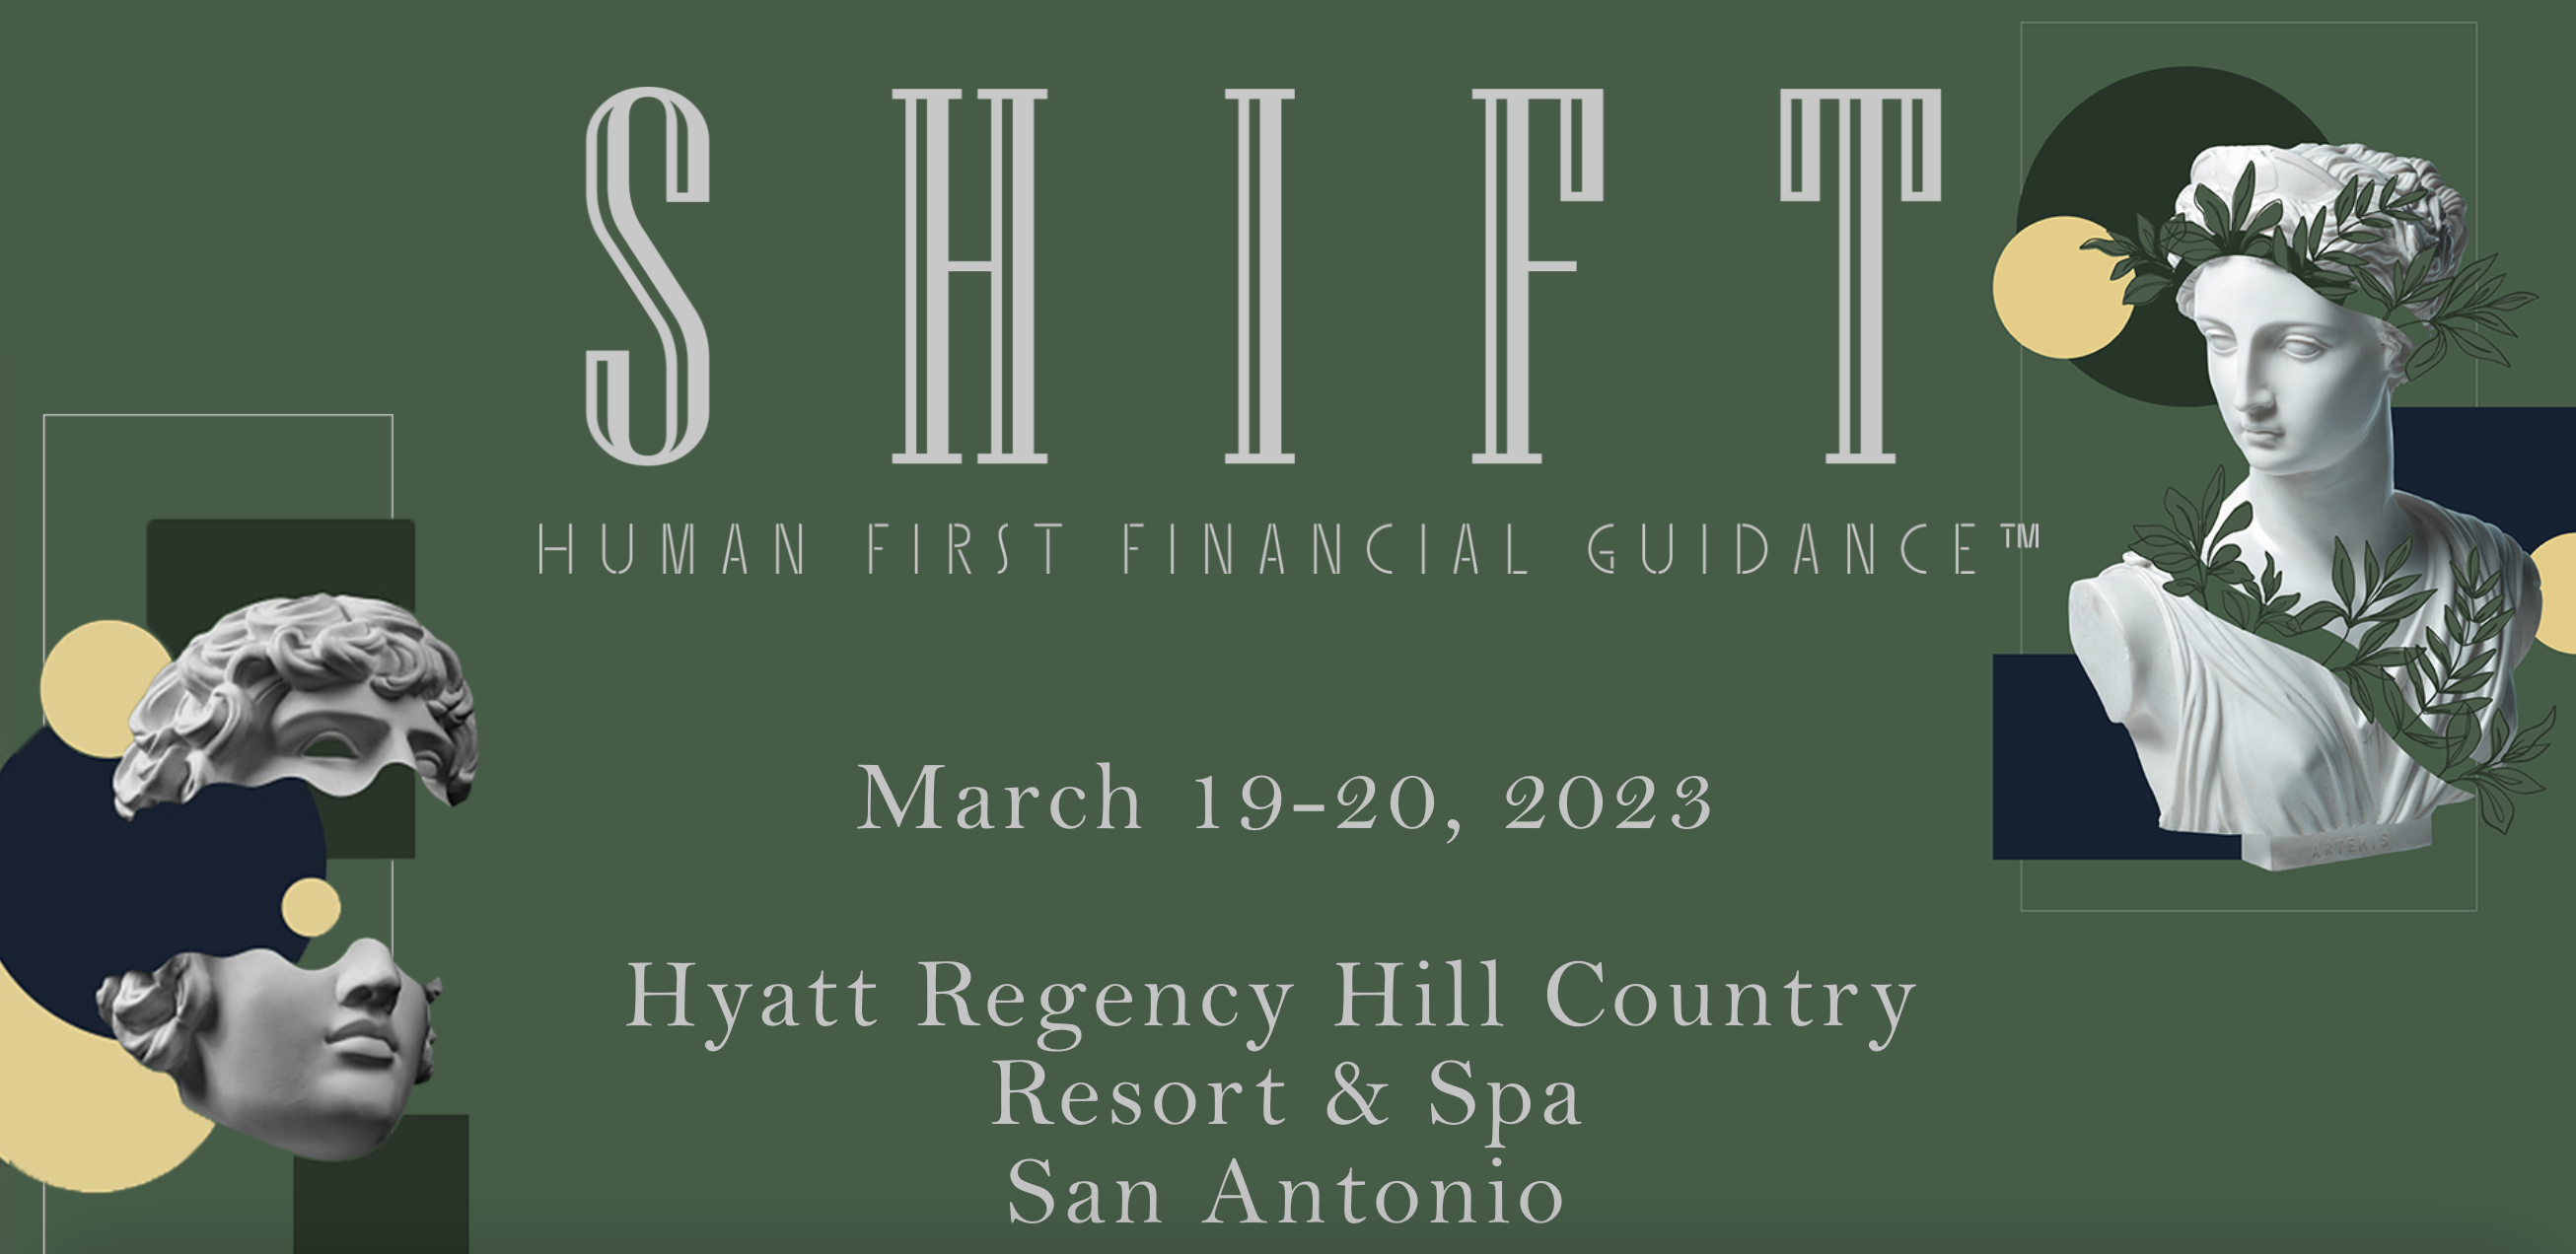 Shift Conference